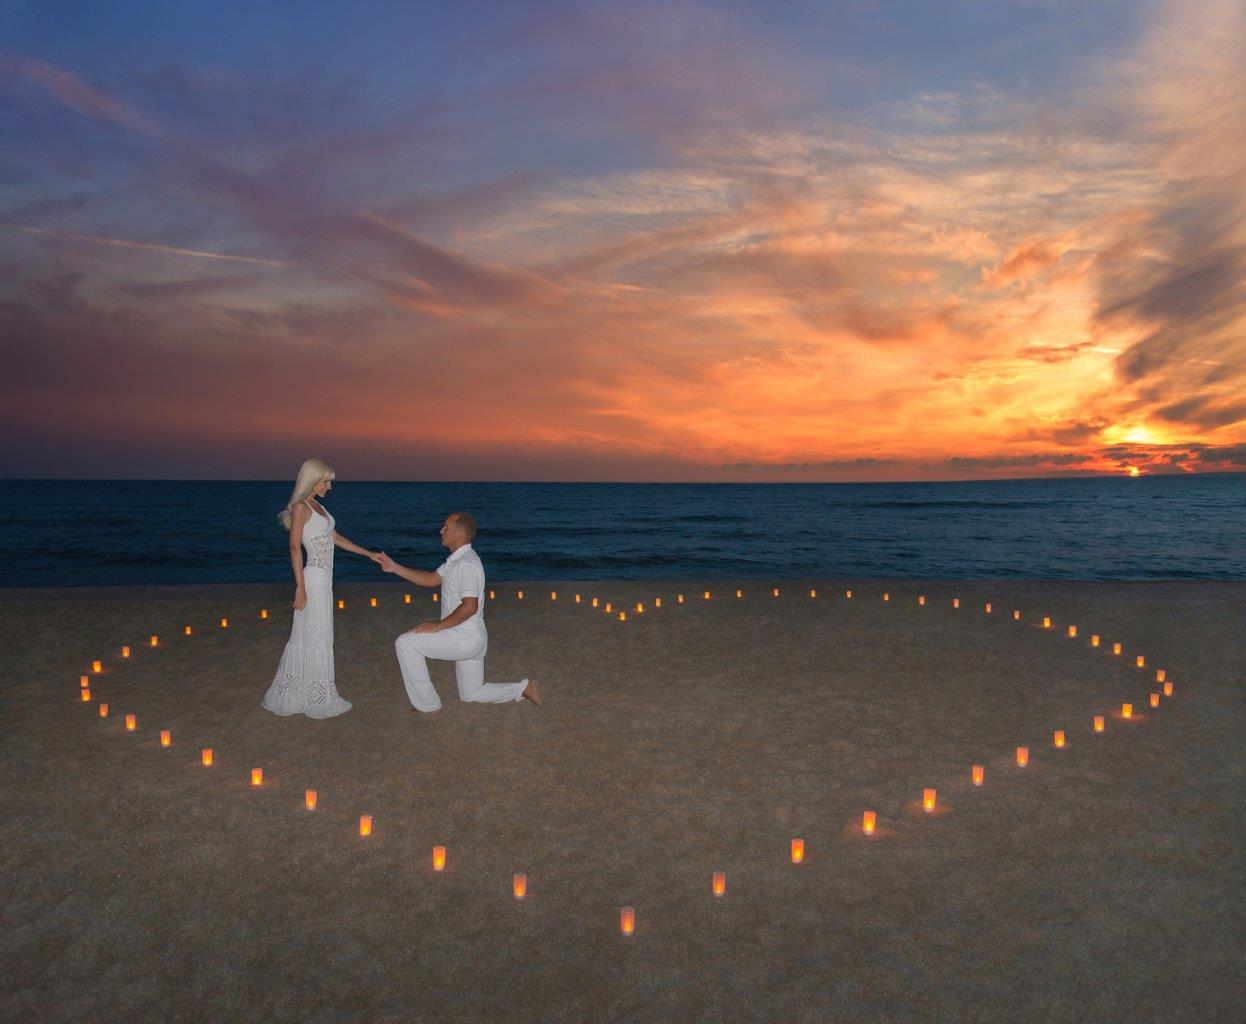 Man proposing to woman at sunset with candles arranged in the shape of a heart